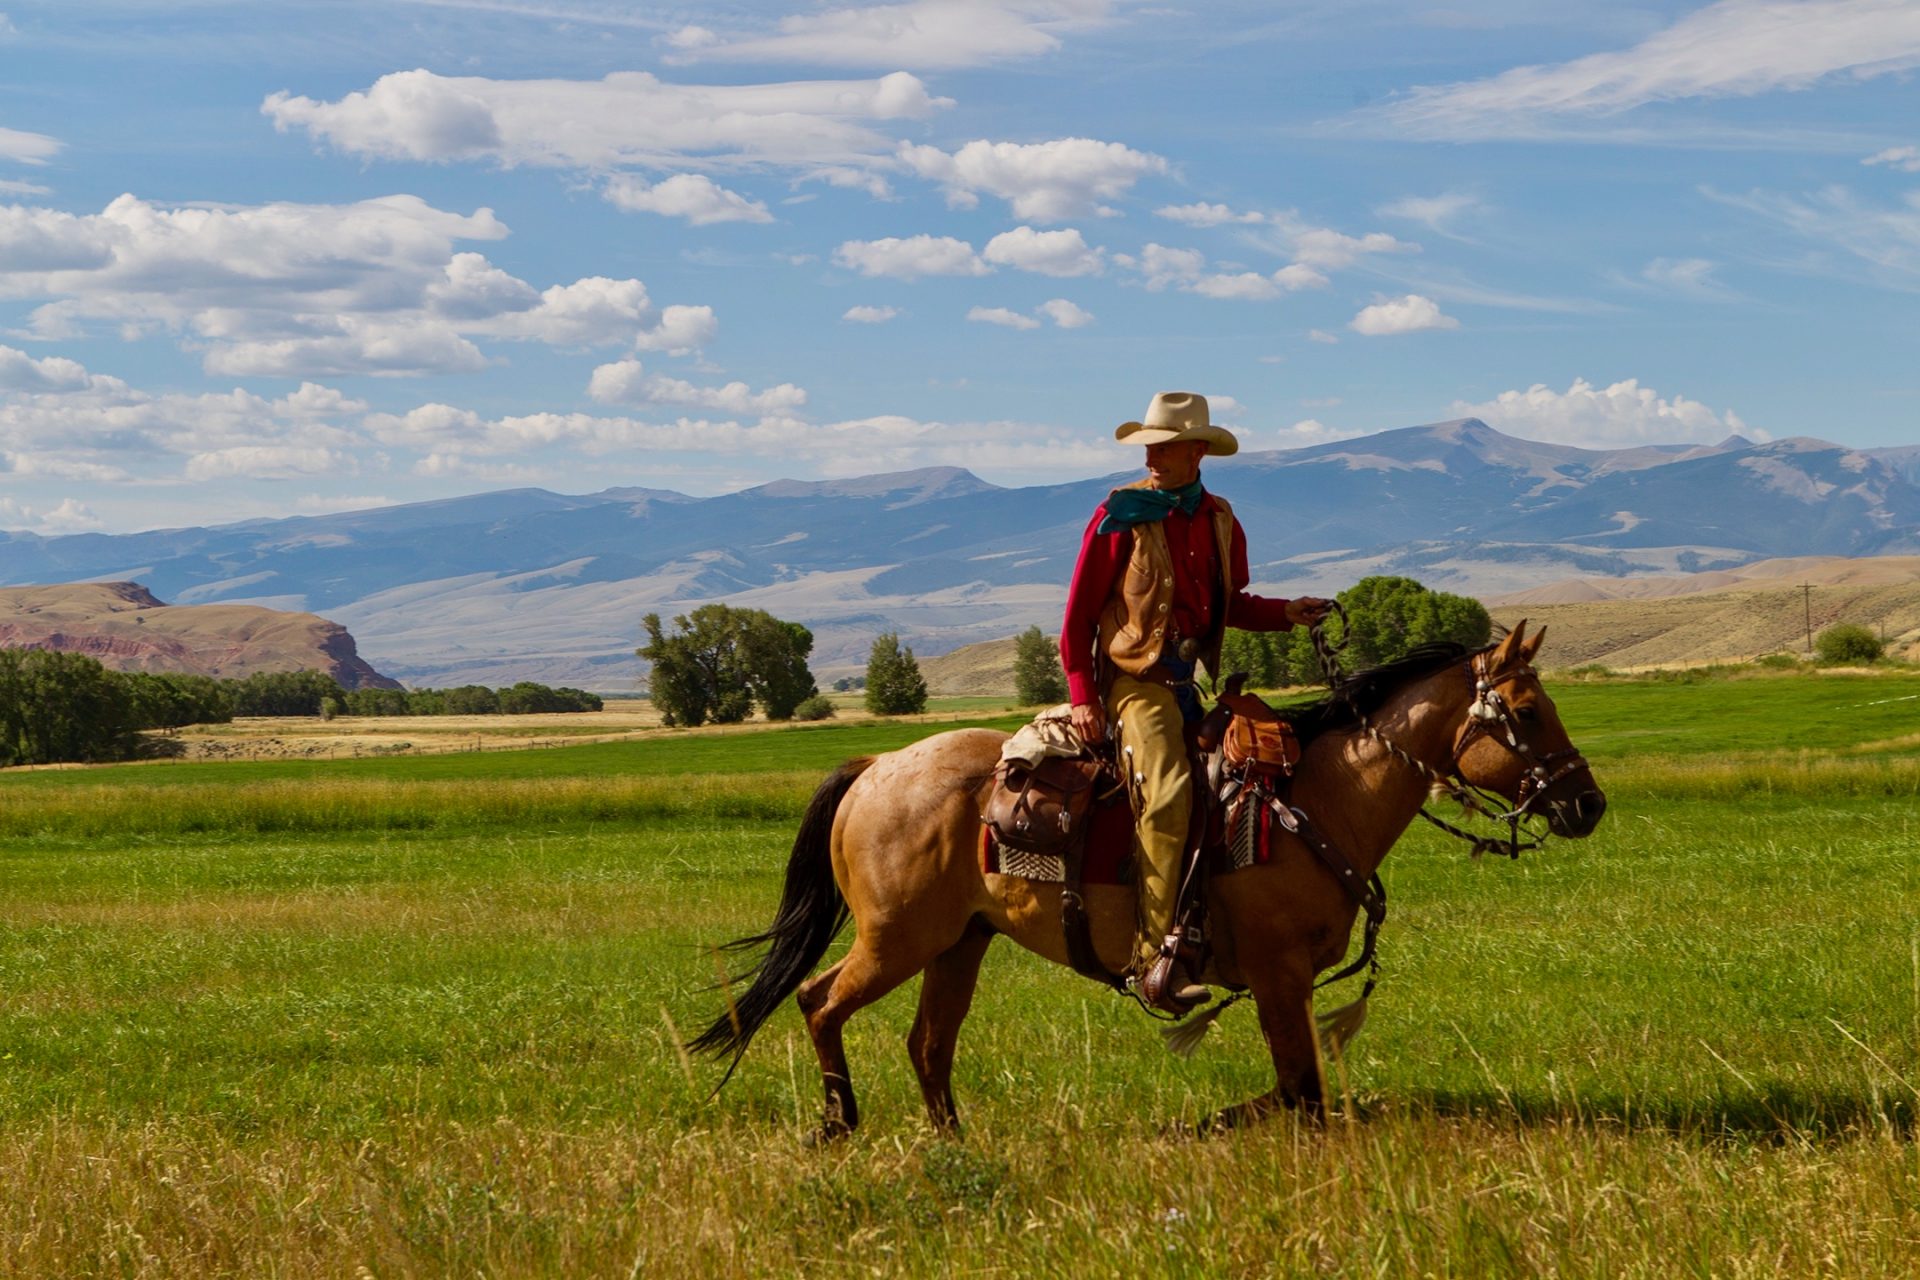 Horse ranch jobs in Wyoming- employment opportunities